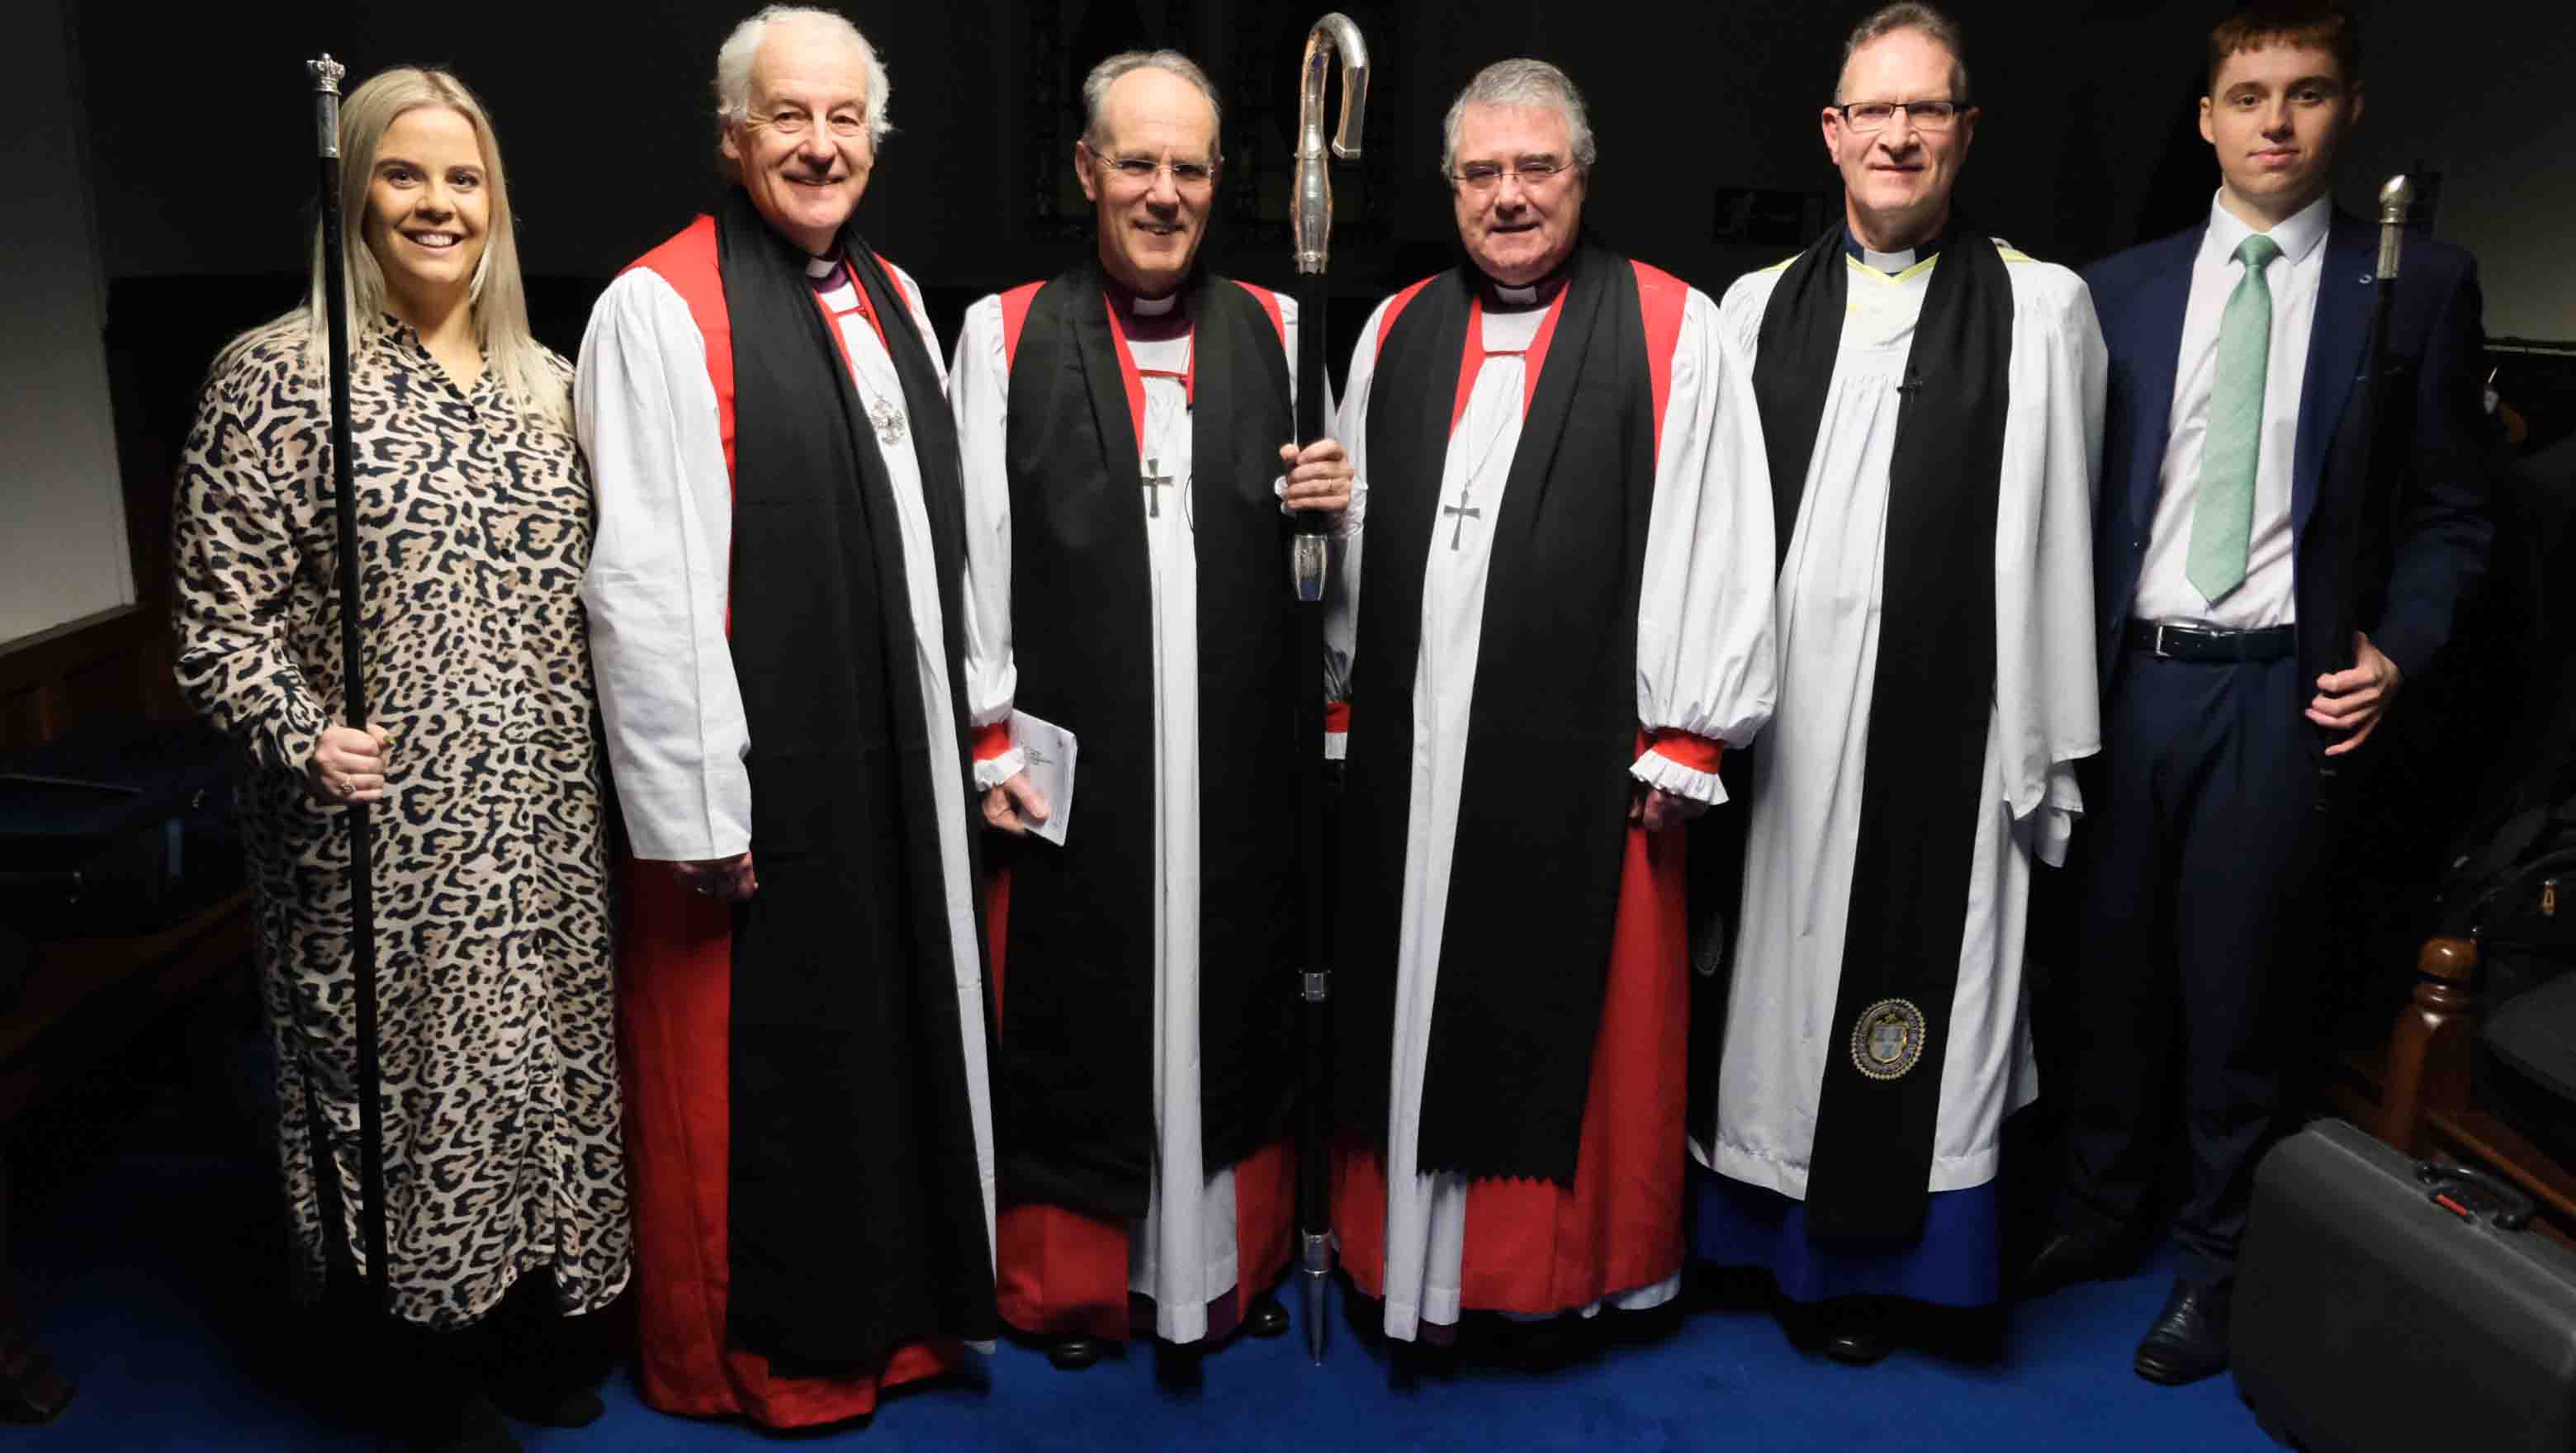 Churchwardens Alanna Williamson (left) and Nathan Clyde (right) with Archbishop Michael Jackson, Bishop Ian Ellis, Archbishop John McDowell and Dean Kenneth Hall, at the service to mark 400 years of worship in Enniskillen.